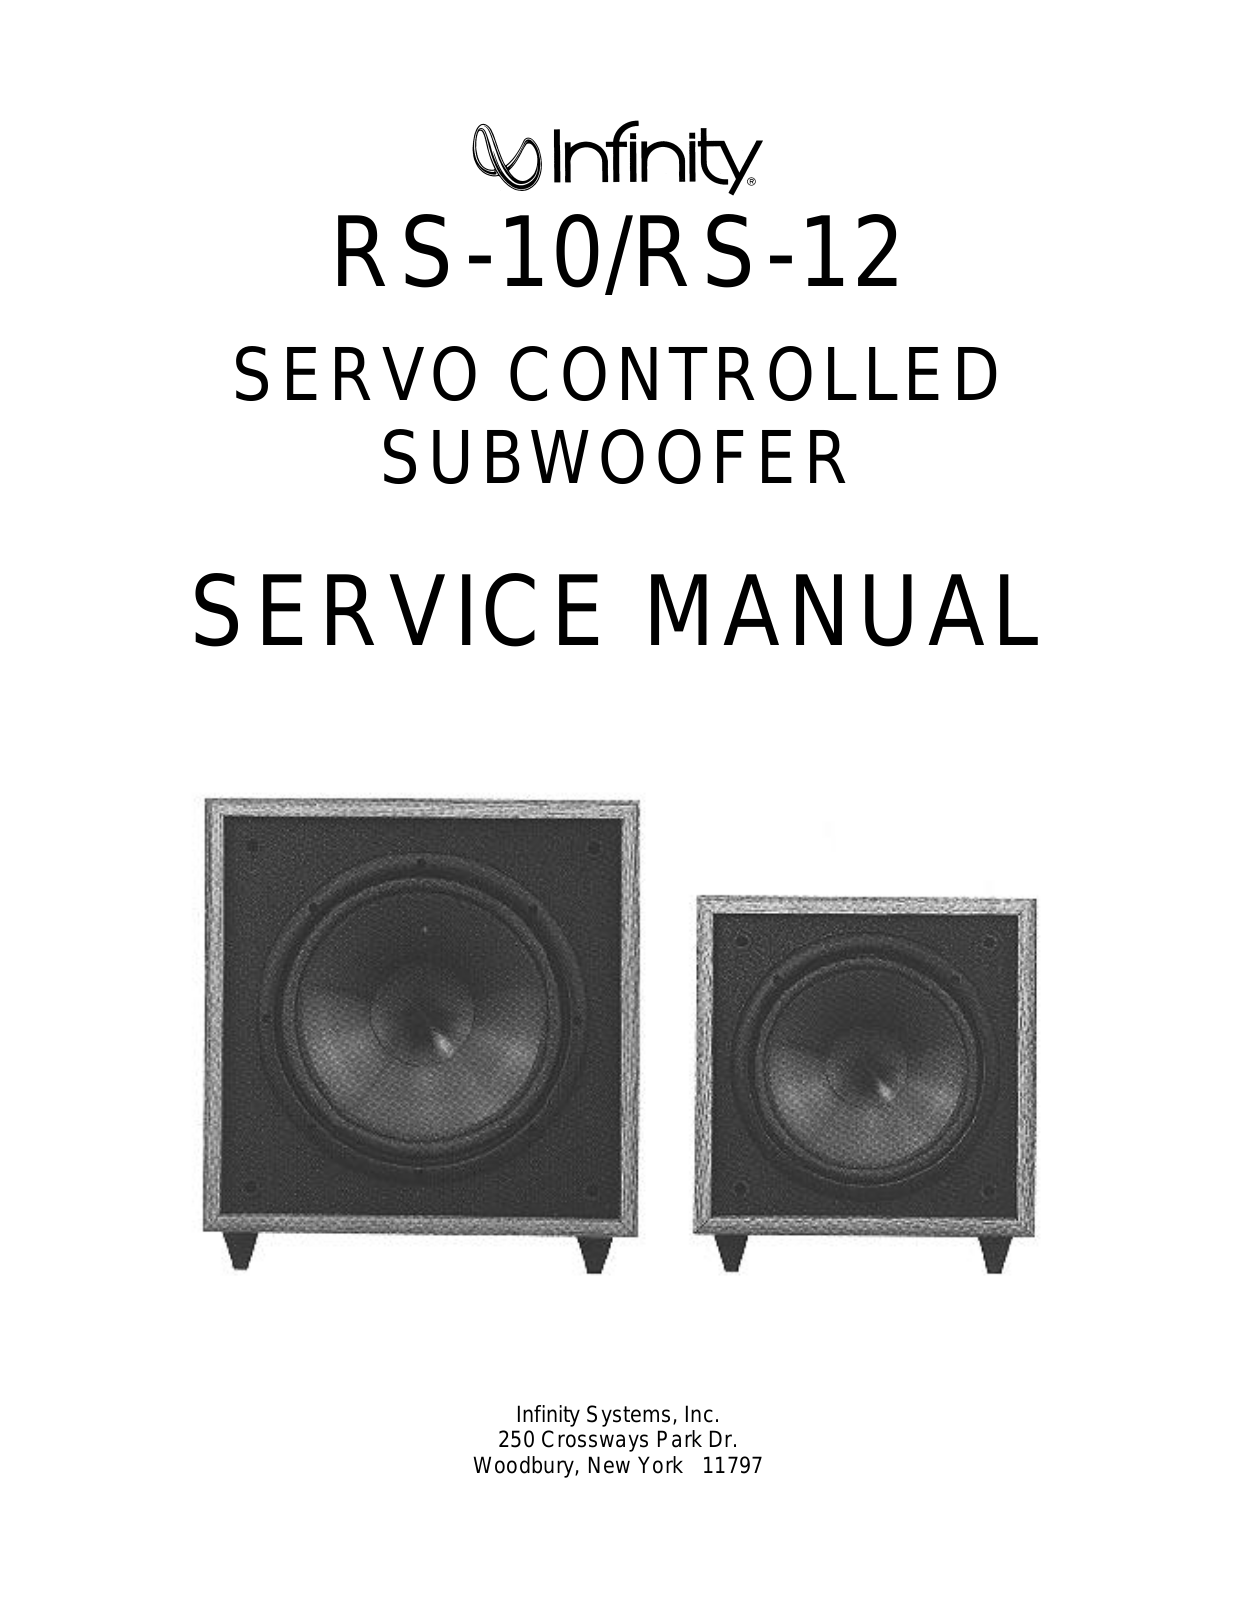 Infinity RS-10, RS-12 Service manual